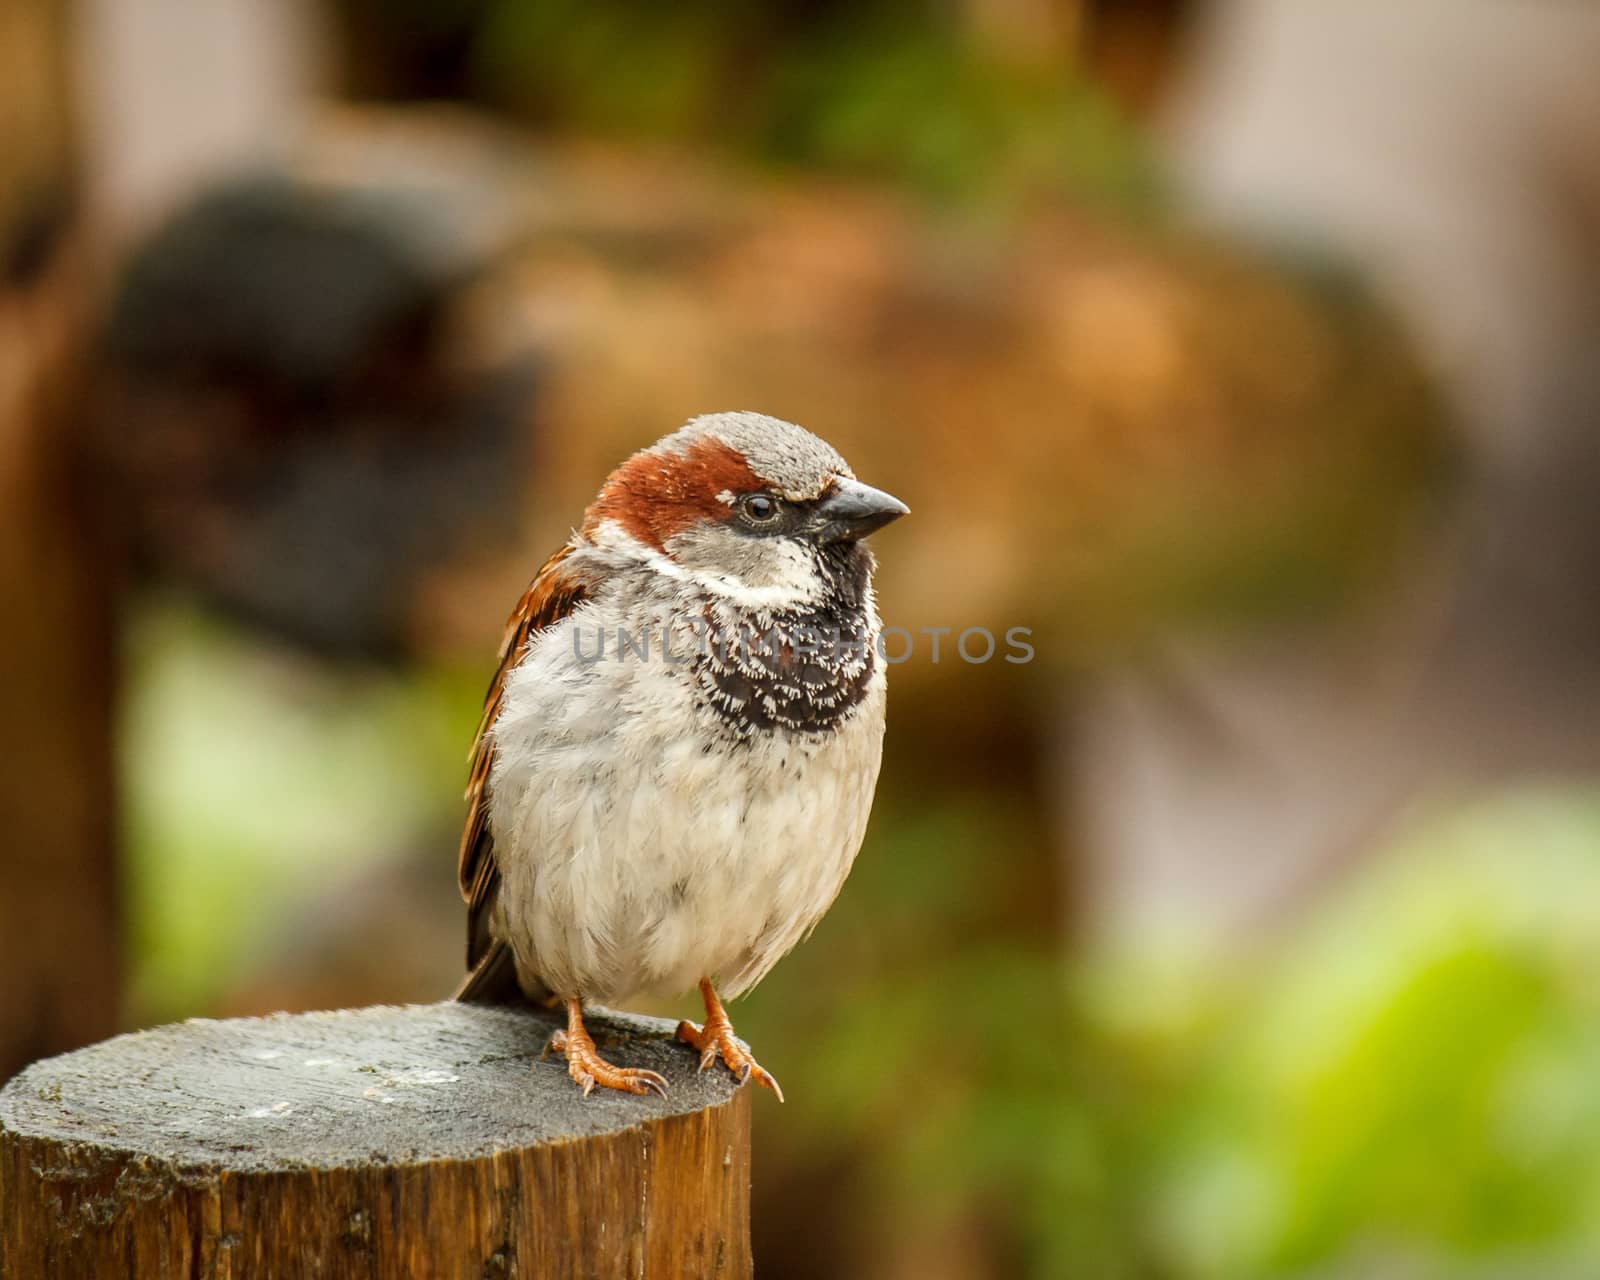 This small bird was standing a beautiful pose for me. Very colorful and beautiful in focus against the soft background